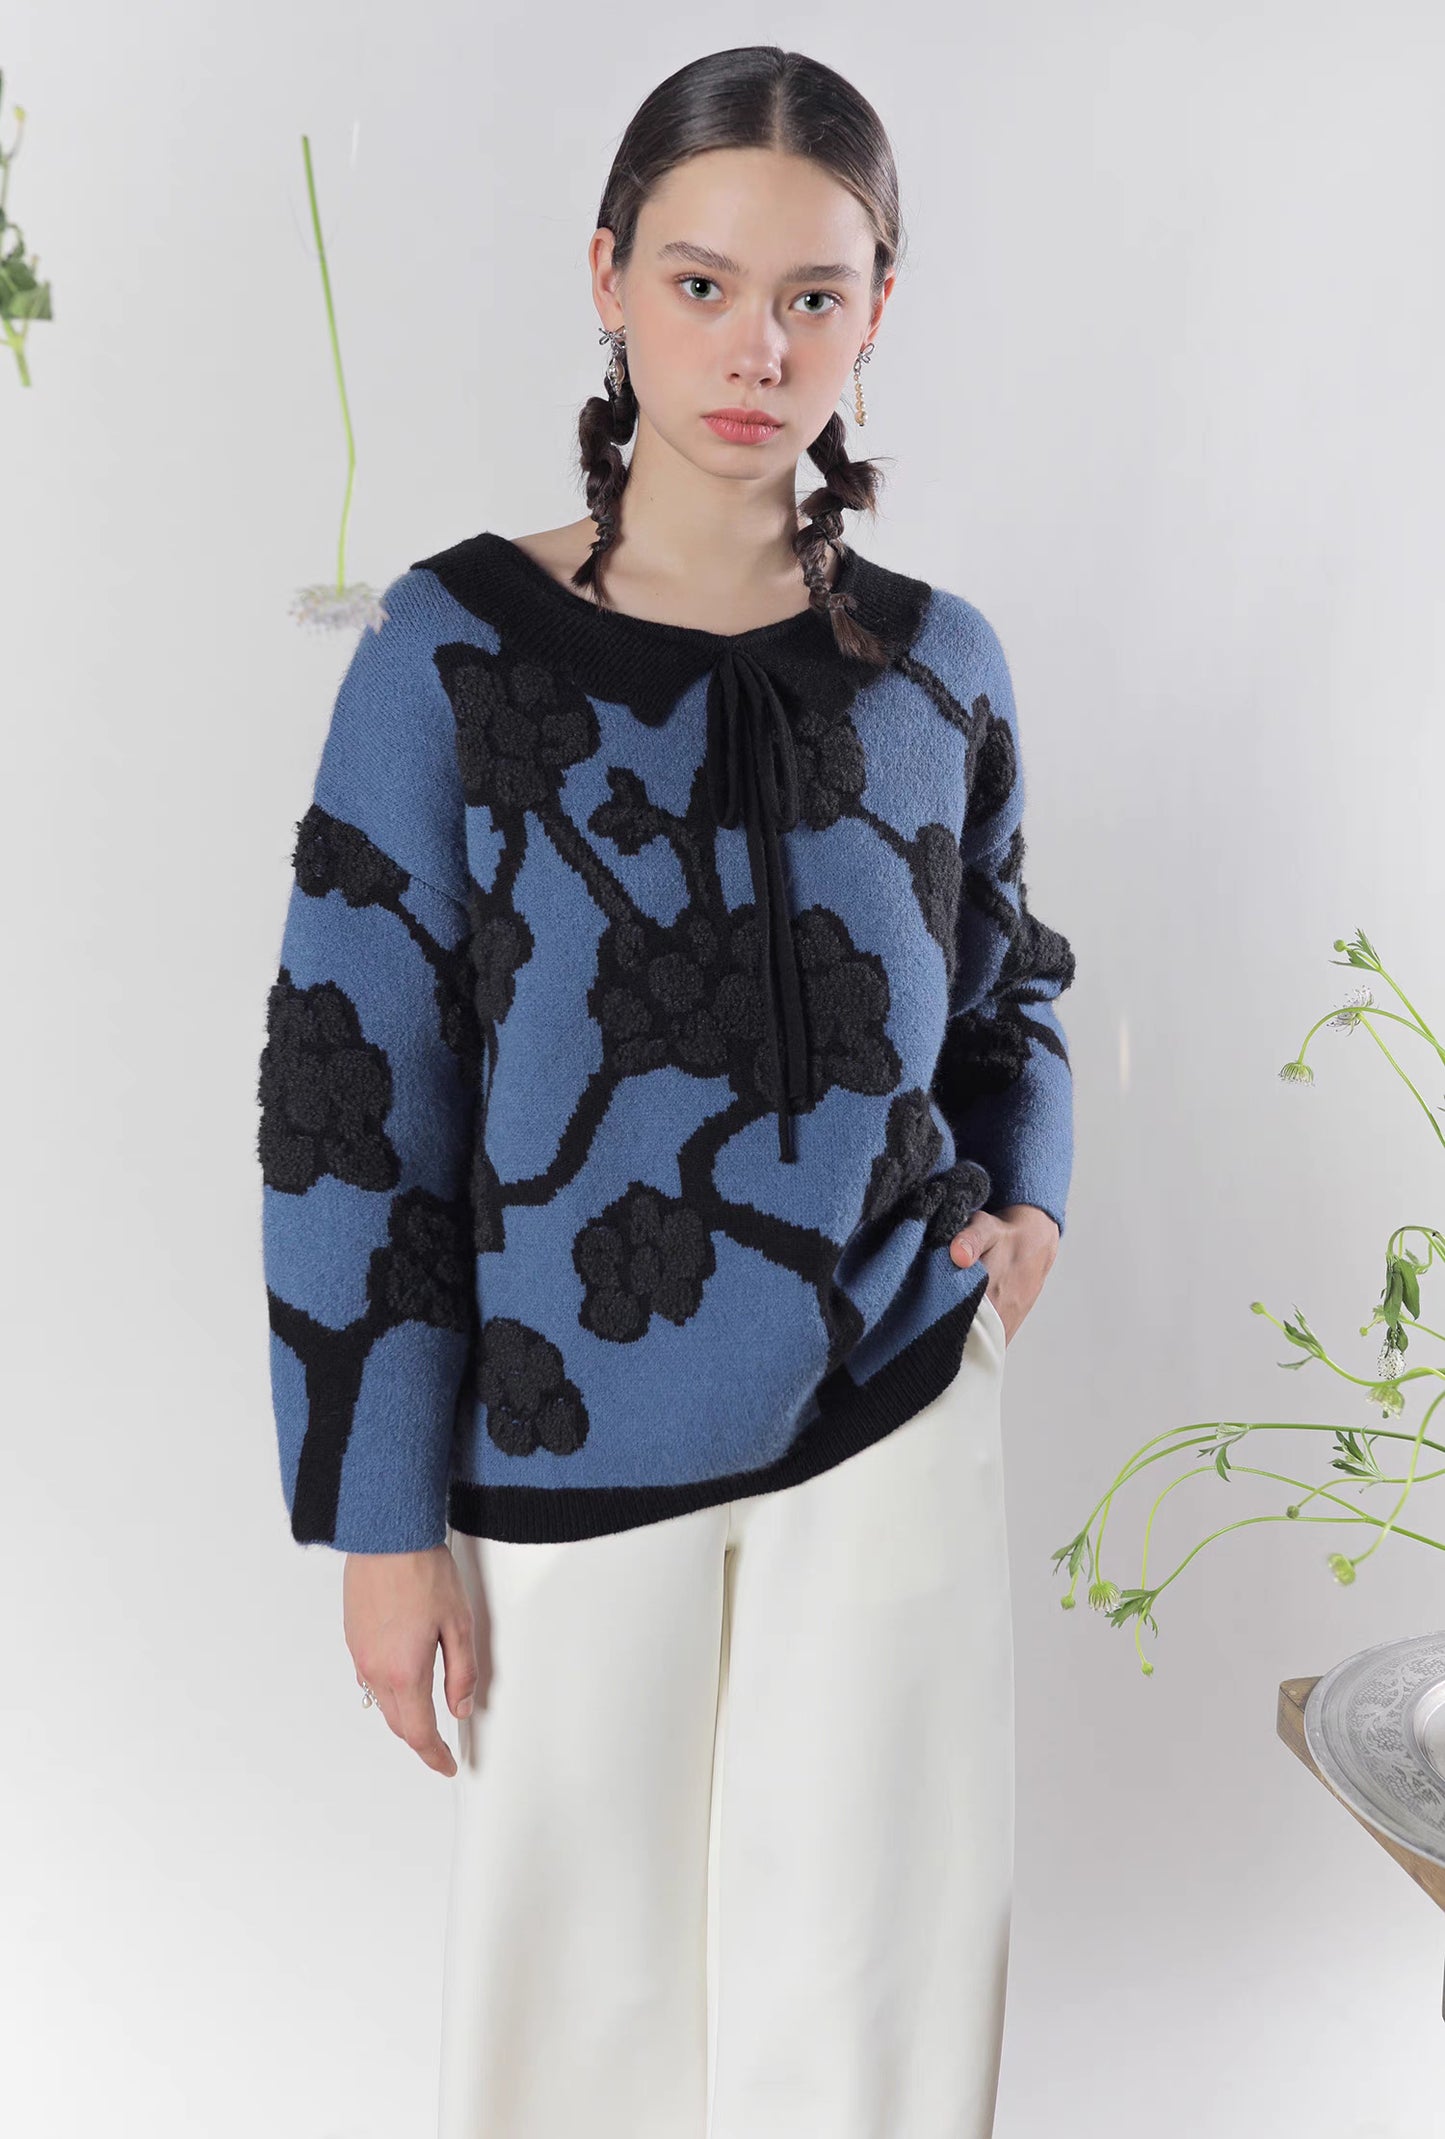 blue and black floral lace loose knitted sweater